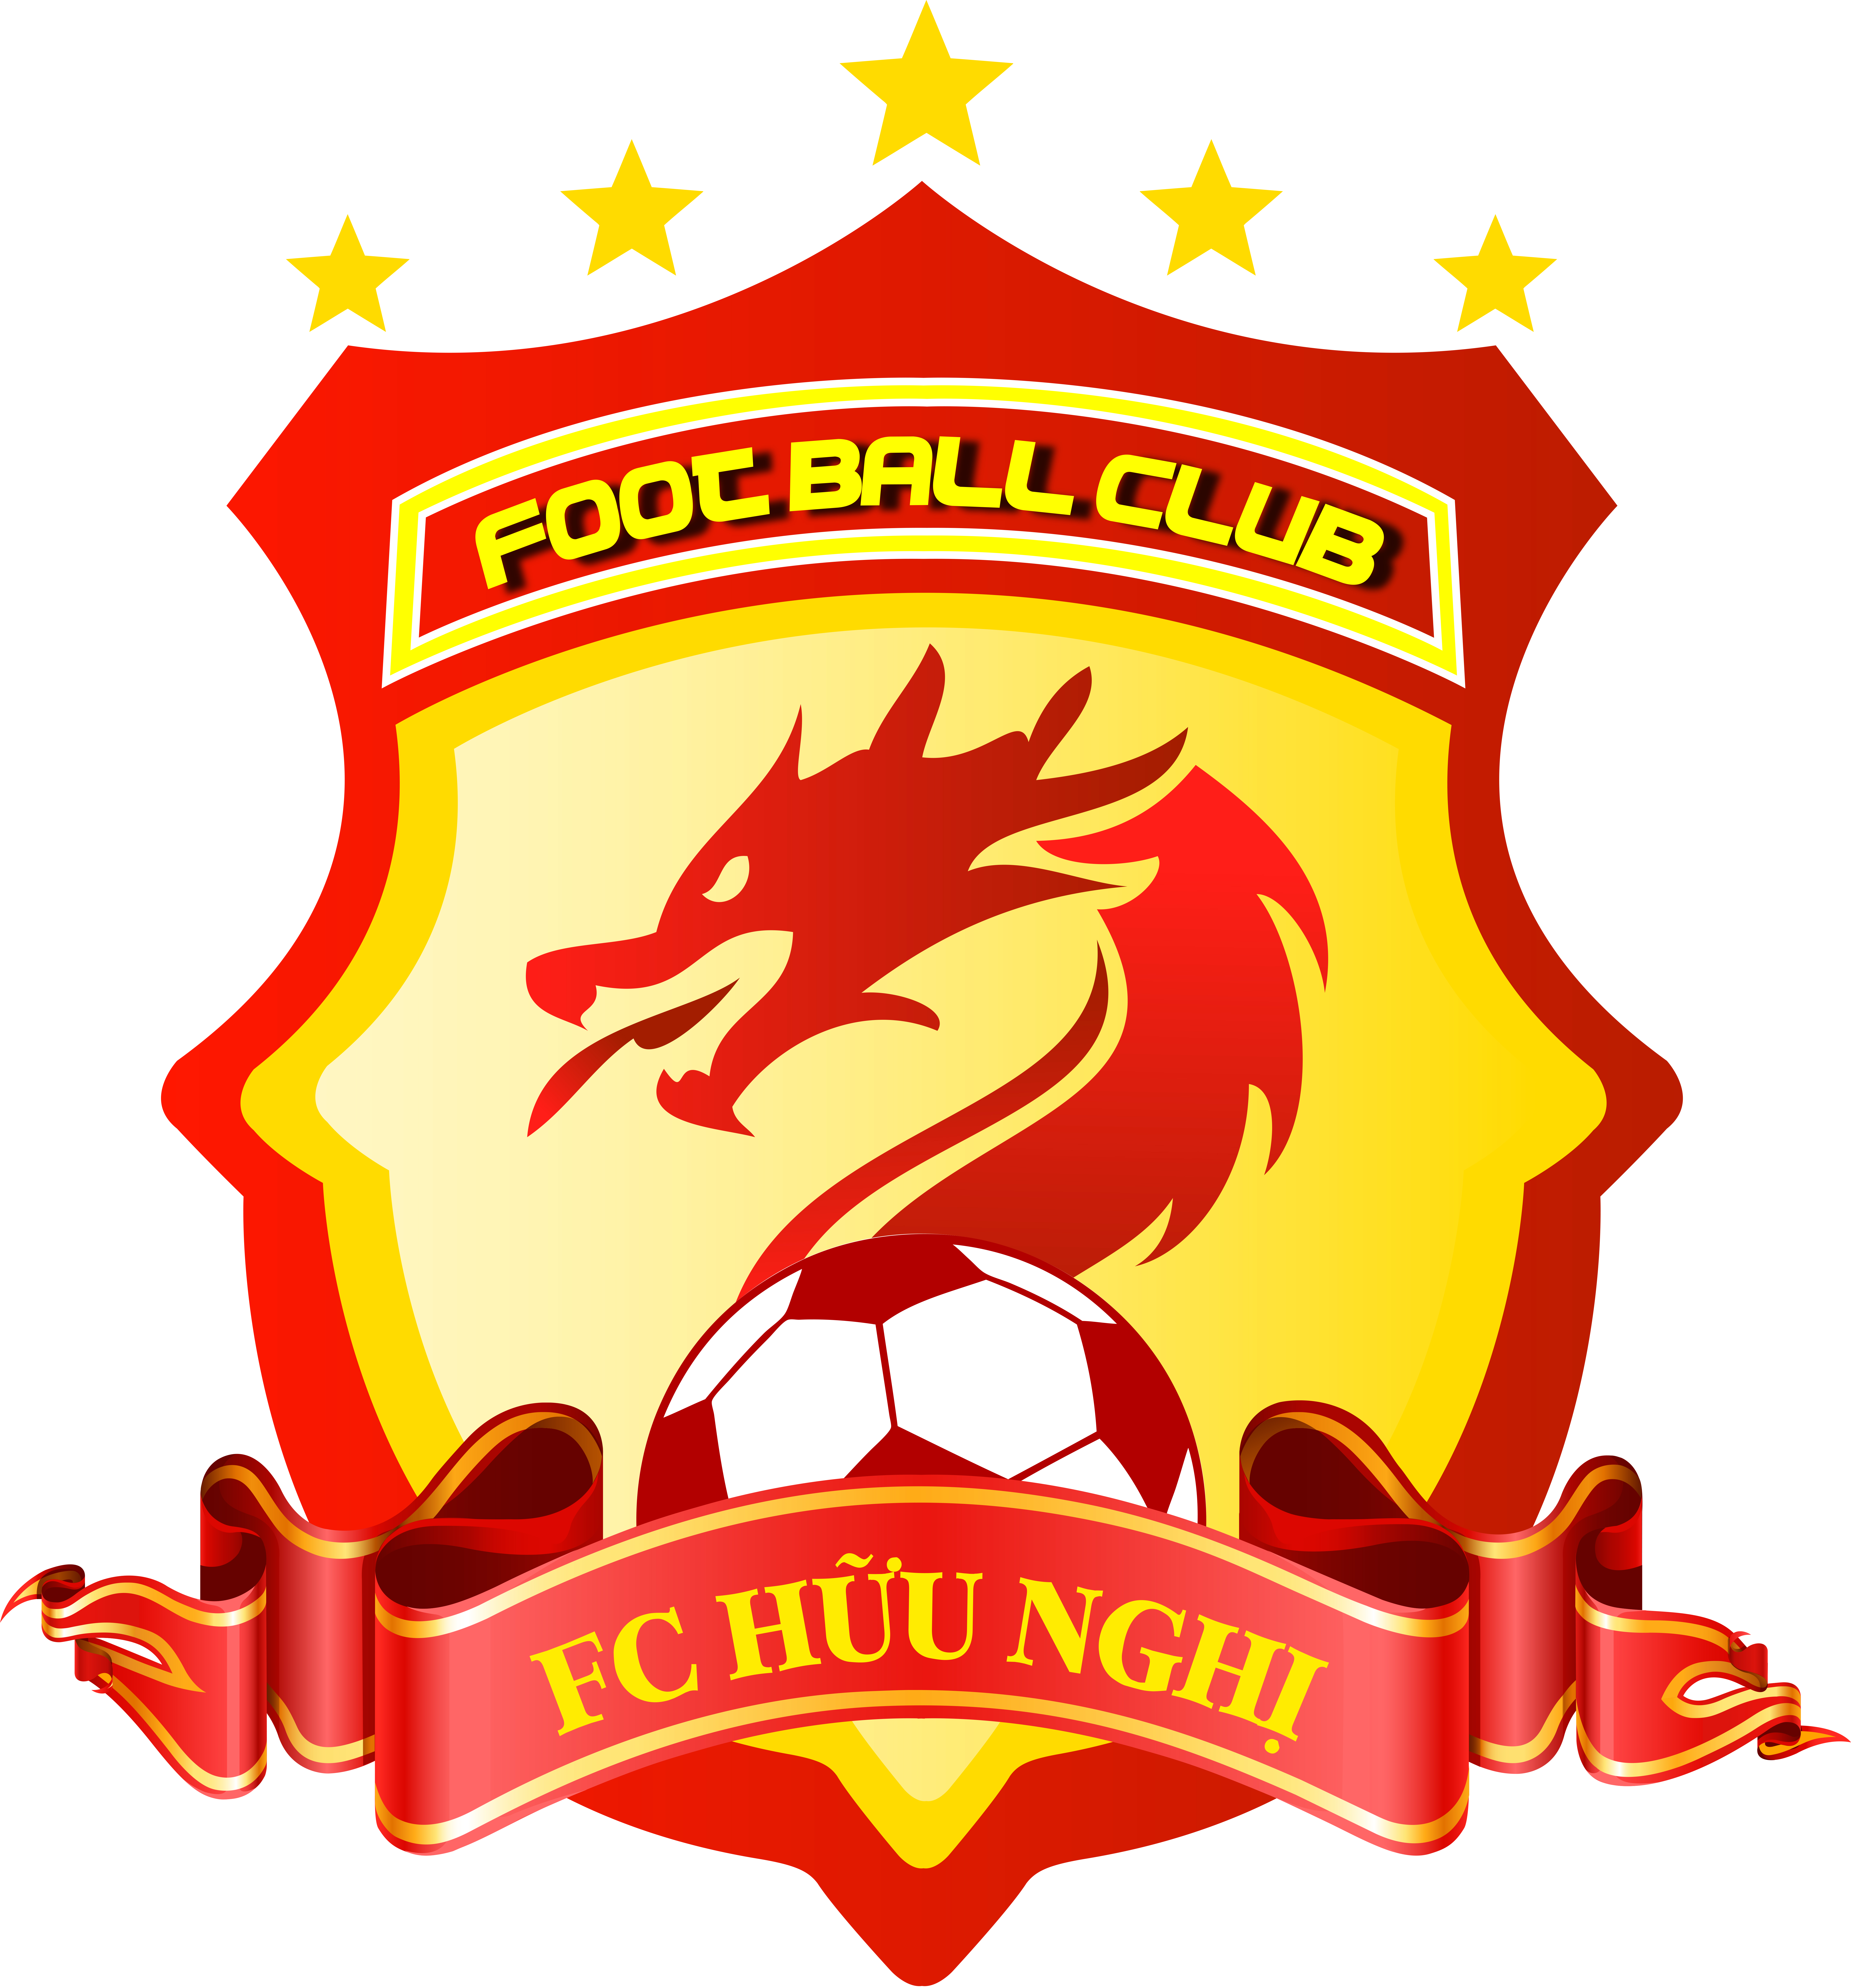 FC HỮU NGHỊ MOSCOW